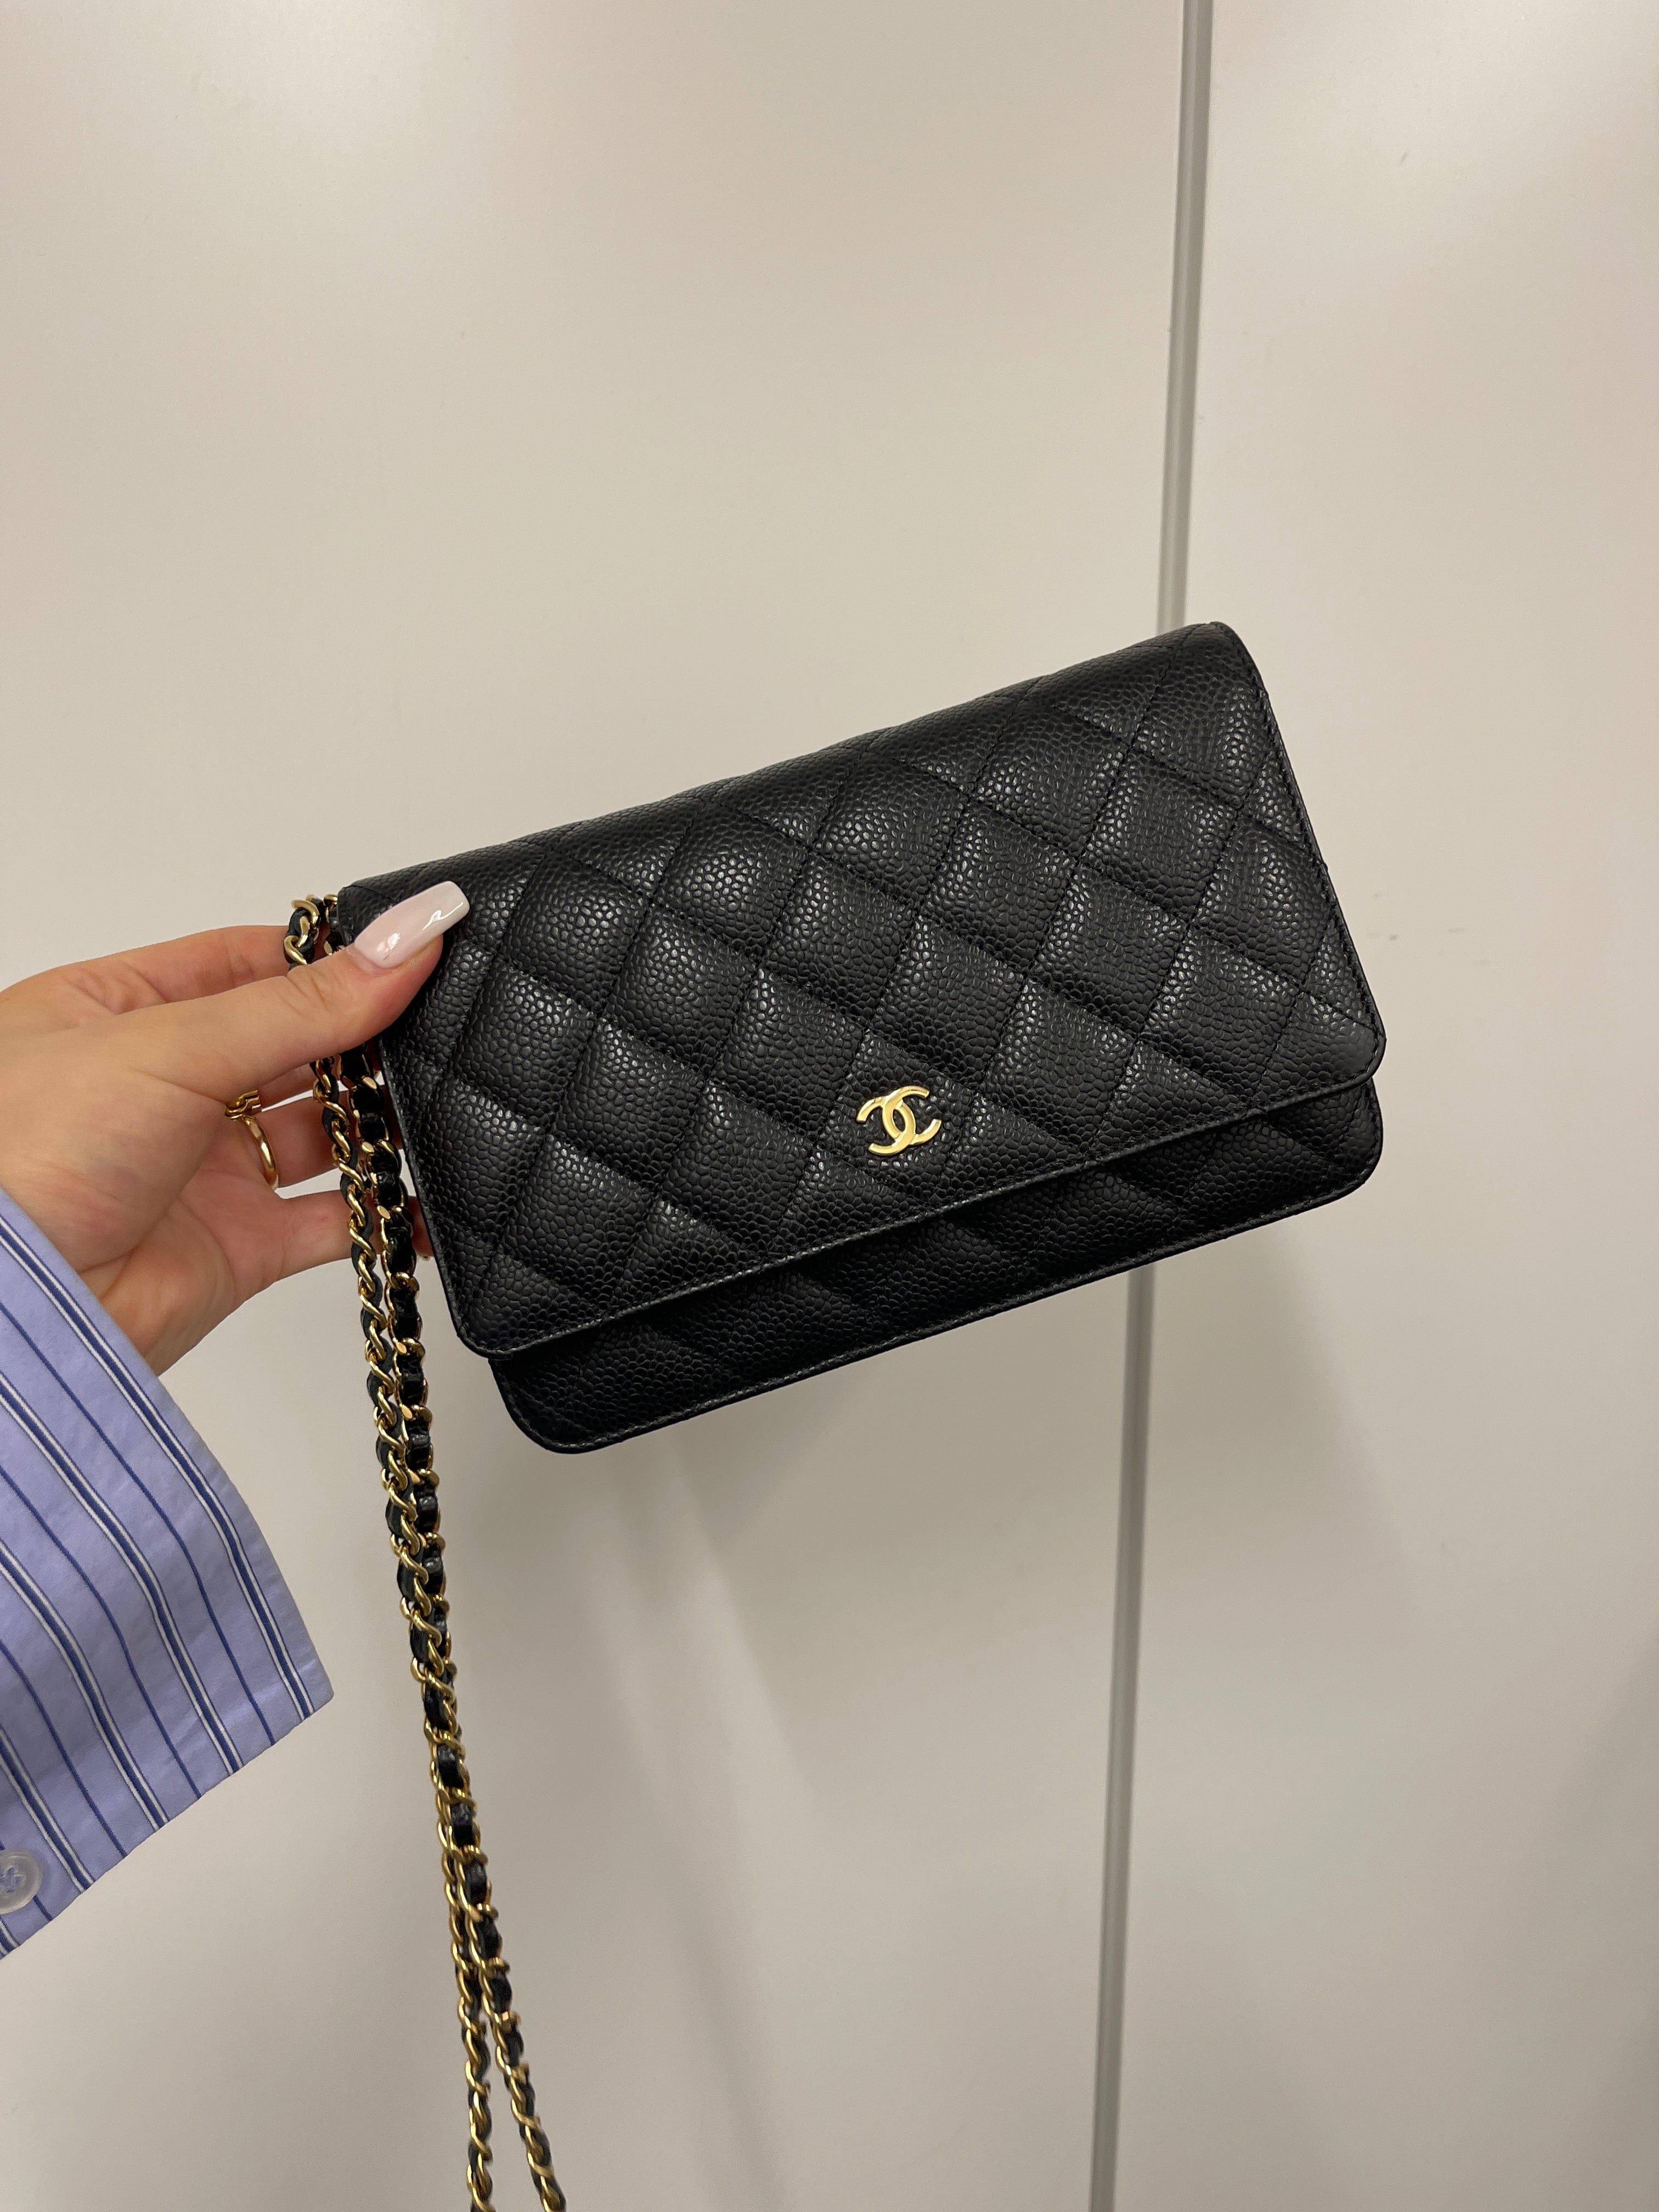 Chanel Chanel back woc with GHW - AJC0608